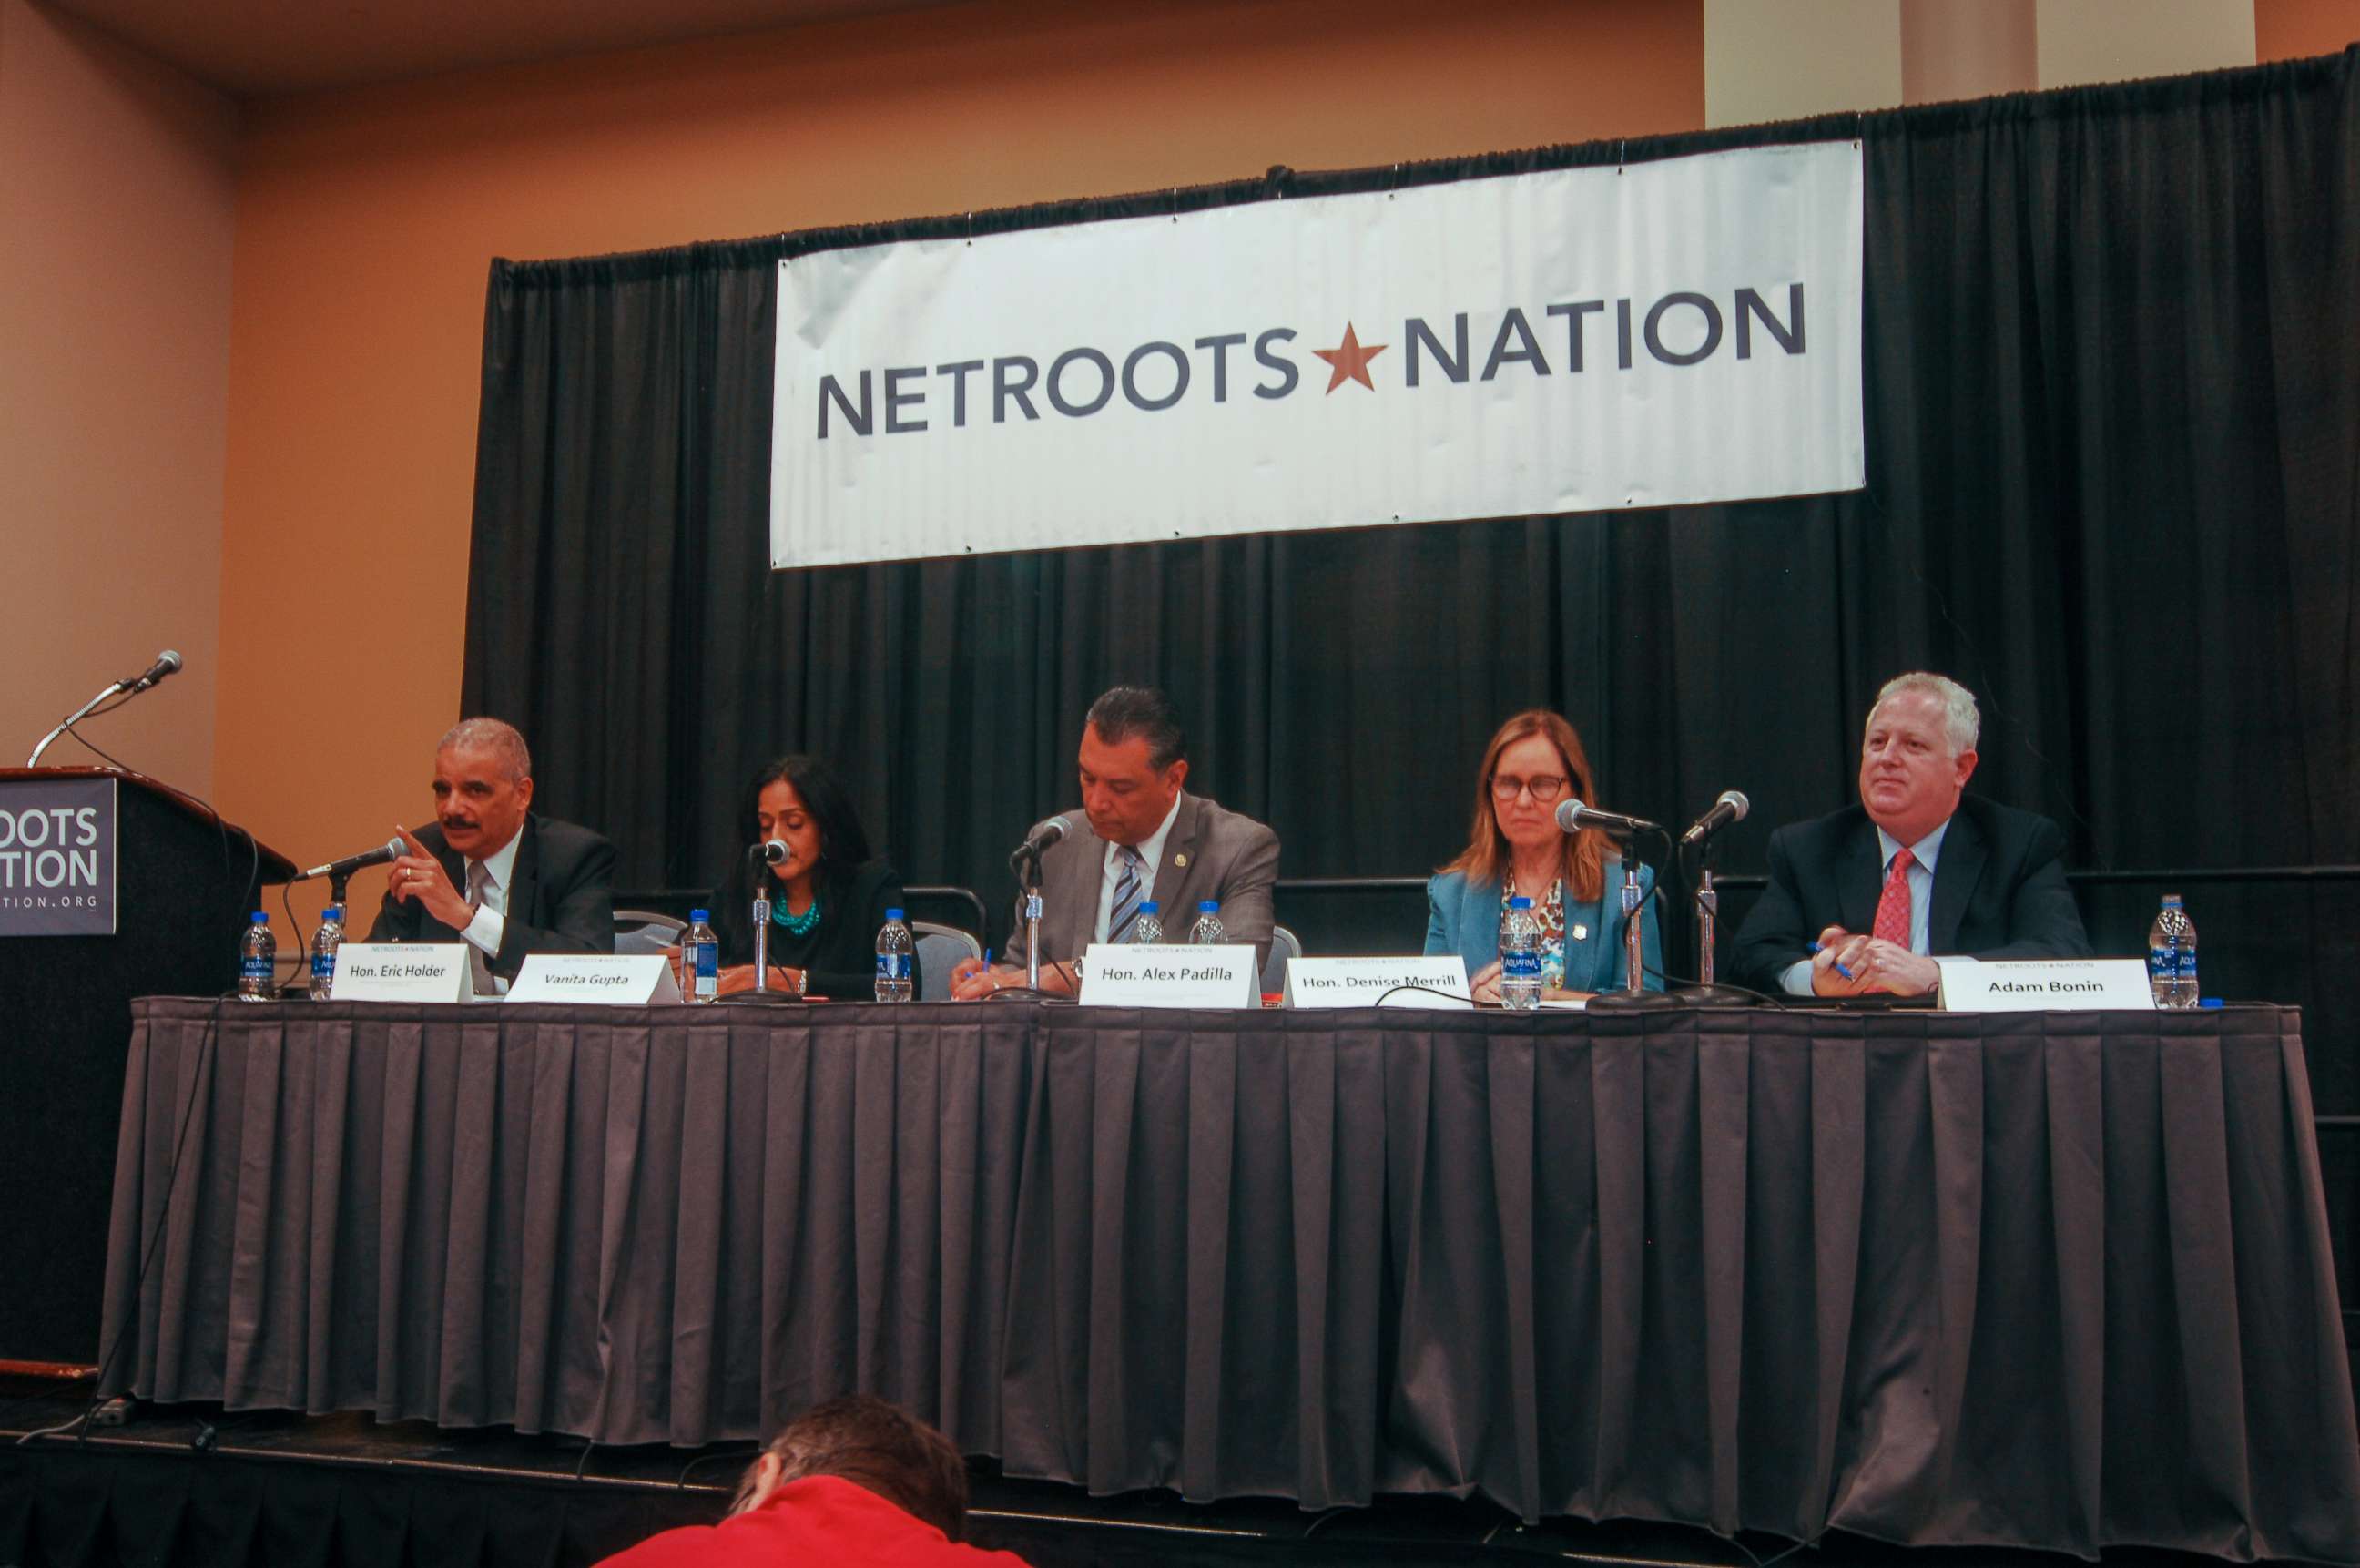 PHOTO: Eric Holder, Vanita Gupta,  Alex Padilla, Denise Merrill, and Adam Bonin participate in a panel discussion about the U.S. Census at Netroots Nation 2019 in Philadelphia, on July 11, 2019.